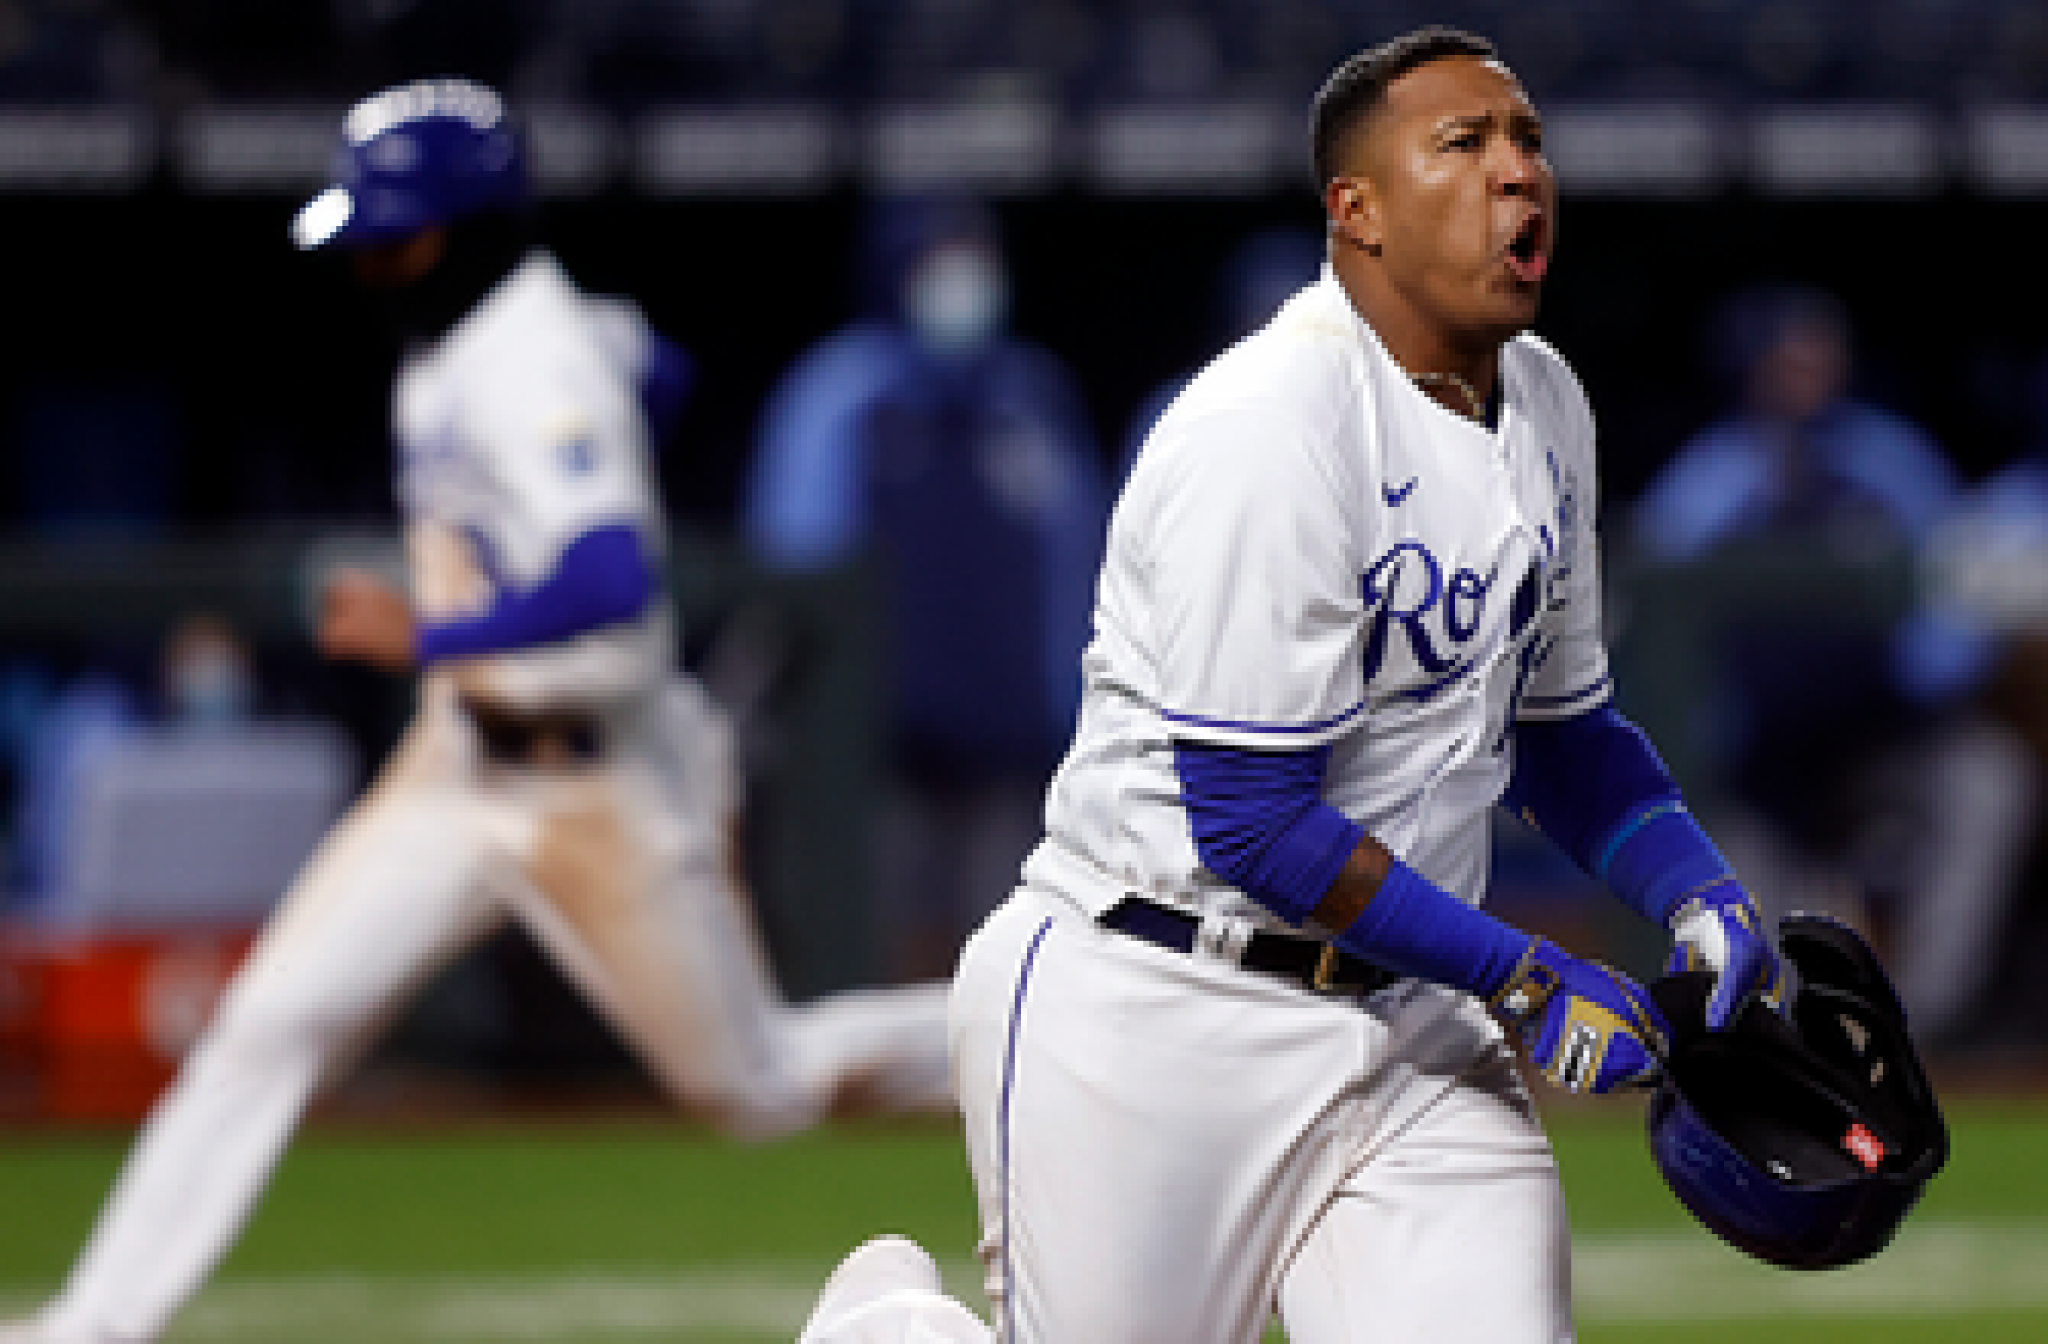 Salvador Perez helps Royals come from behind to walk off vs. Rays, 9-8